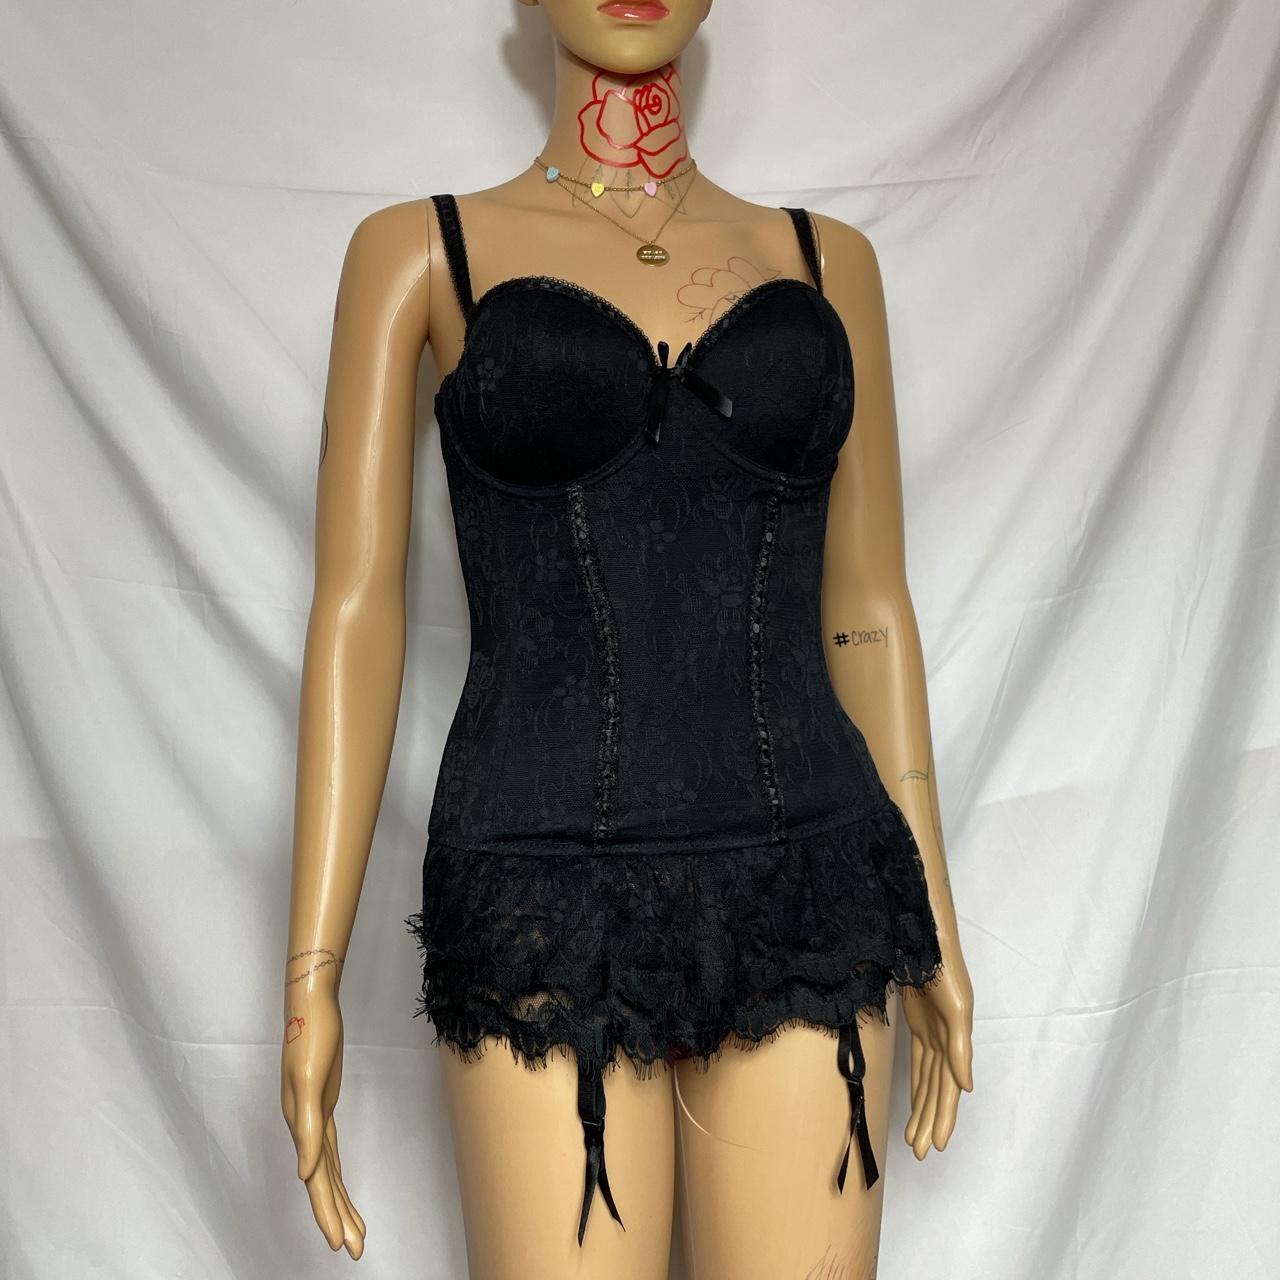 Product Image 1 - Hot black lace bustier. Flattering